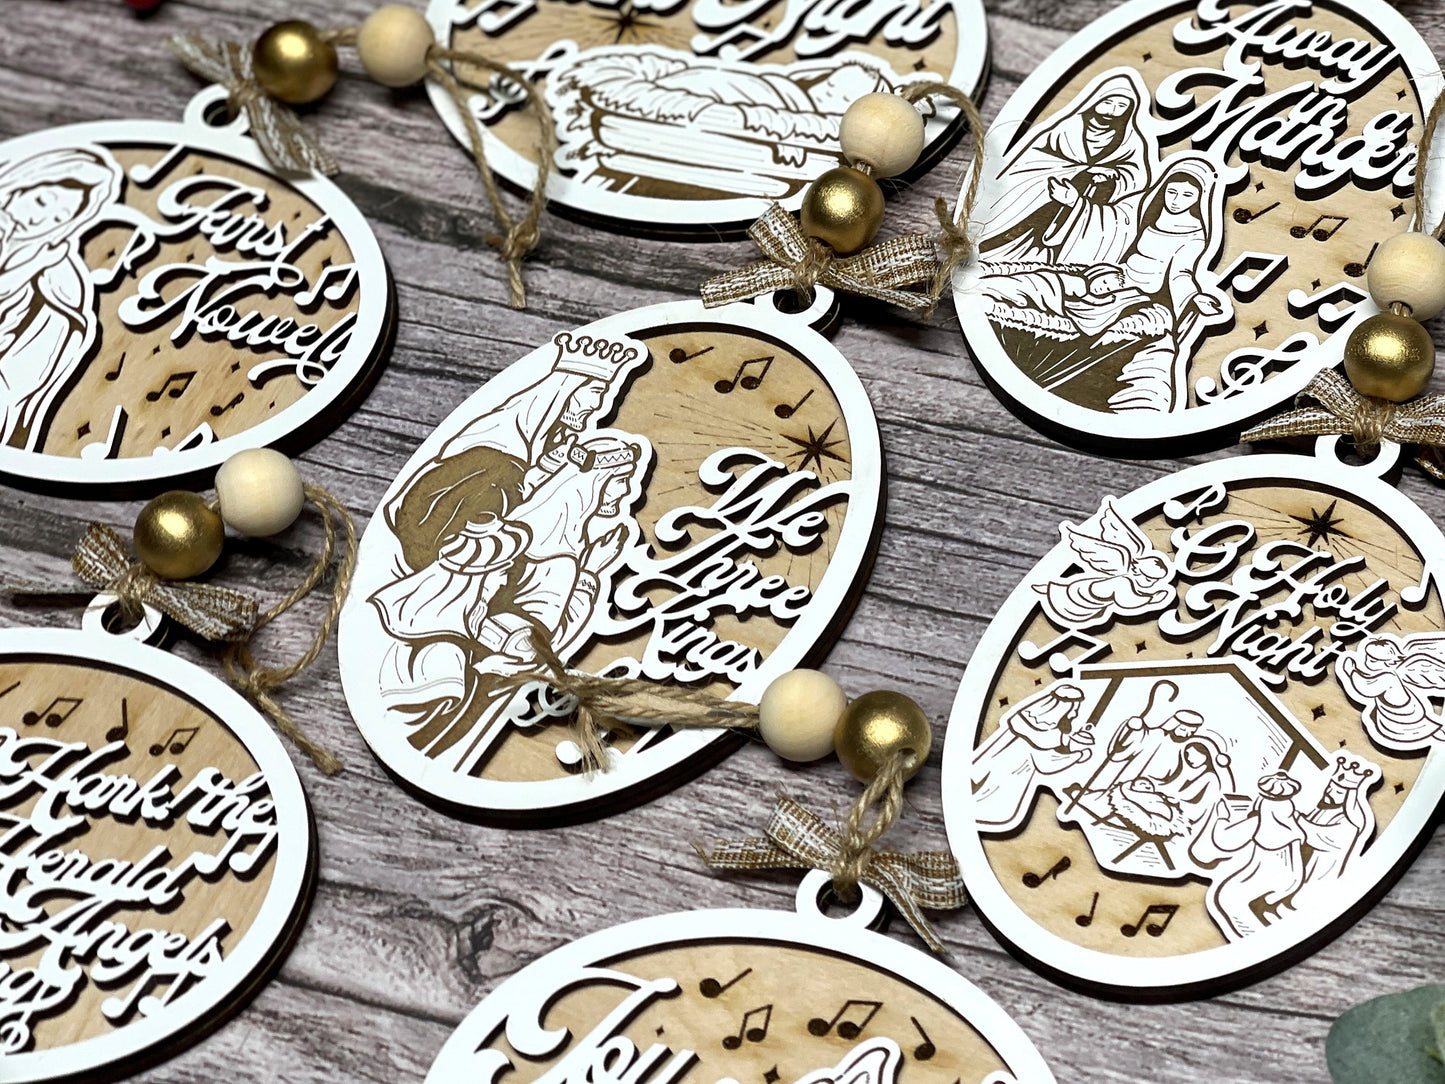 The Classic Christian Carol Ornaments - Includes 8 Unique Designs and 2 Box Designs - Tested on Glowforge & Lightburn